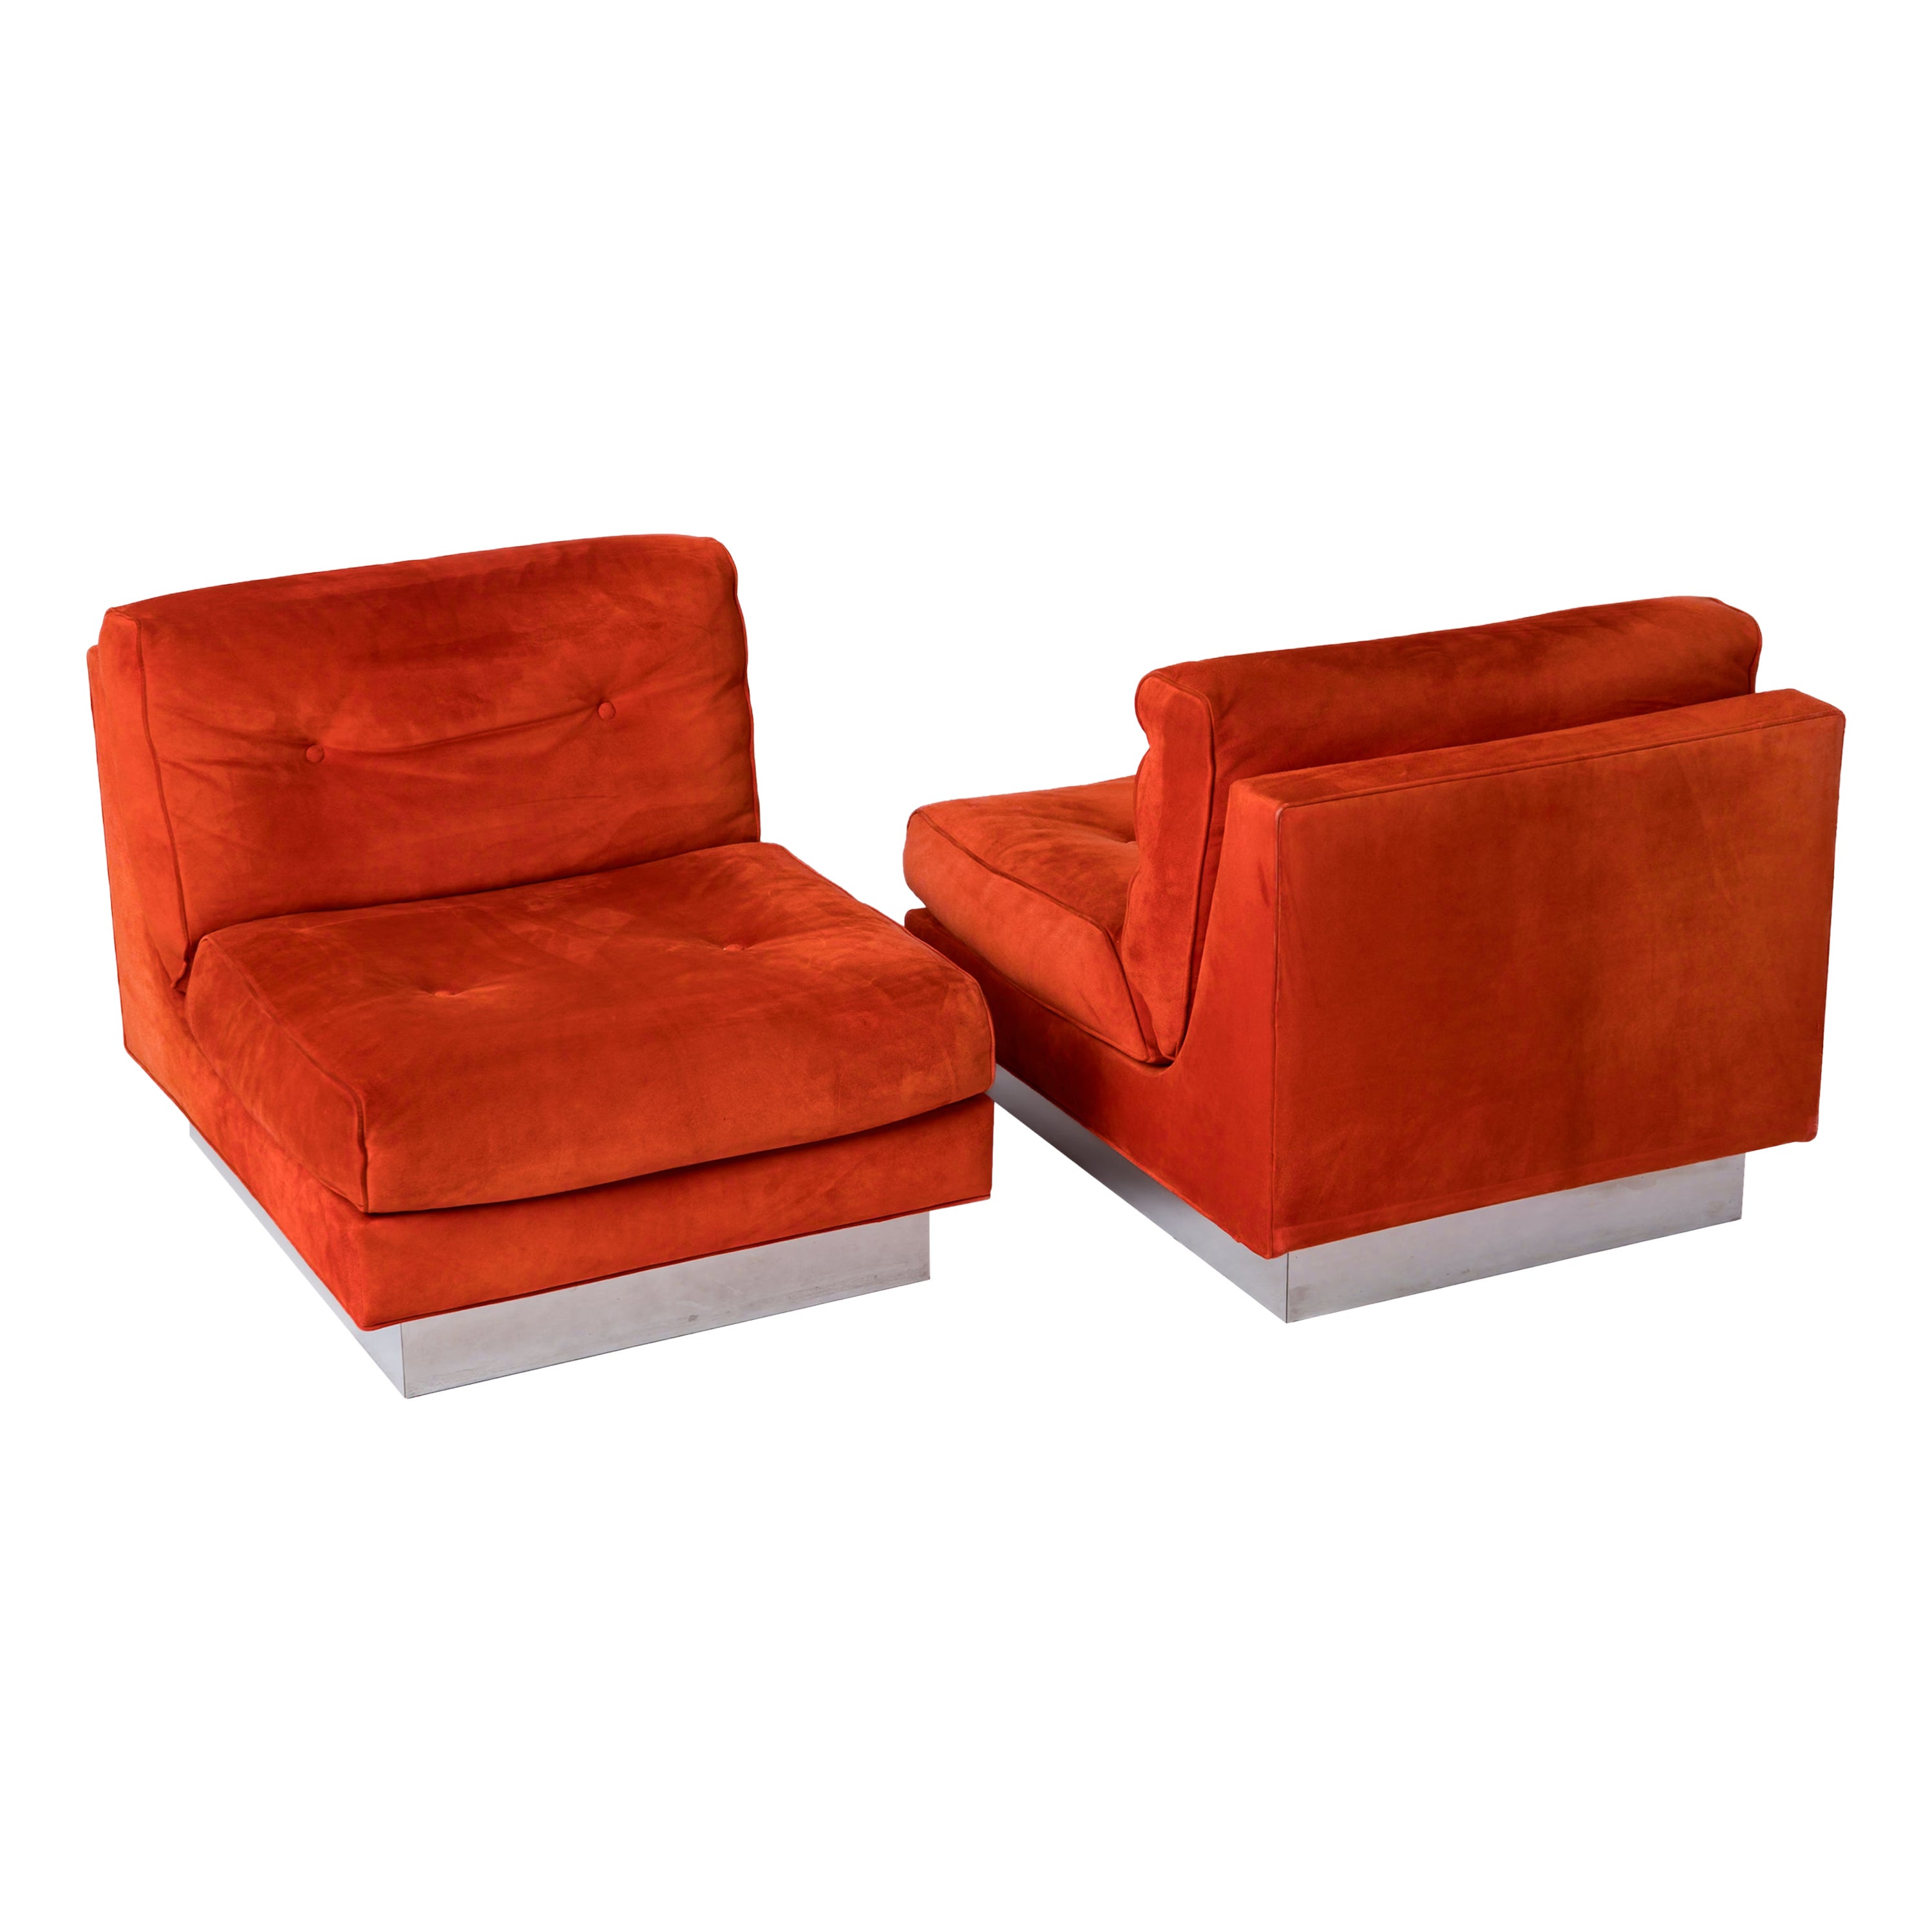 Two Blood Orange Suede "Californian" Lounge Chairs by J. Charpentier - France 